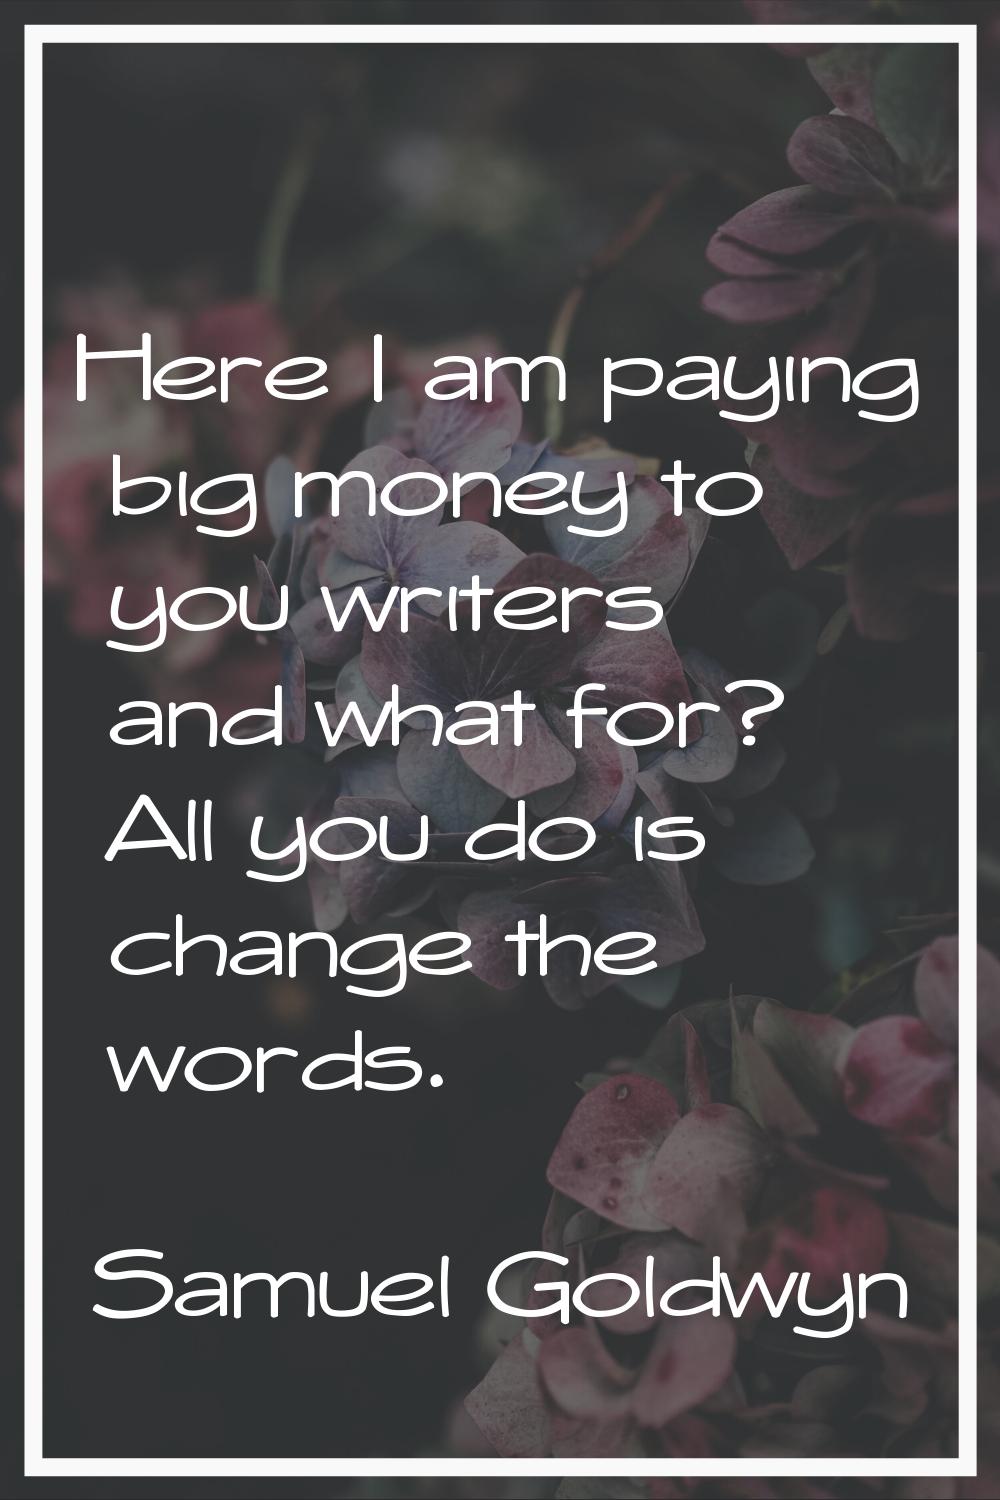 Here I am paying big money to you writers and what for? All you do is change the words.